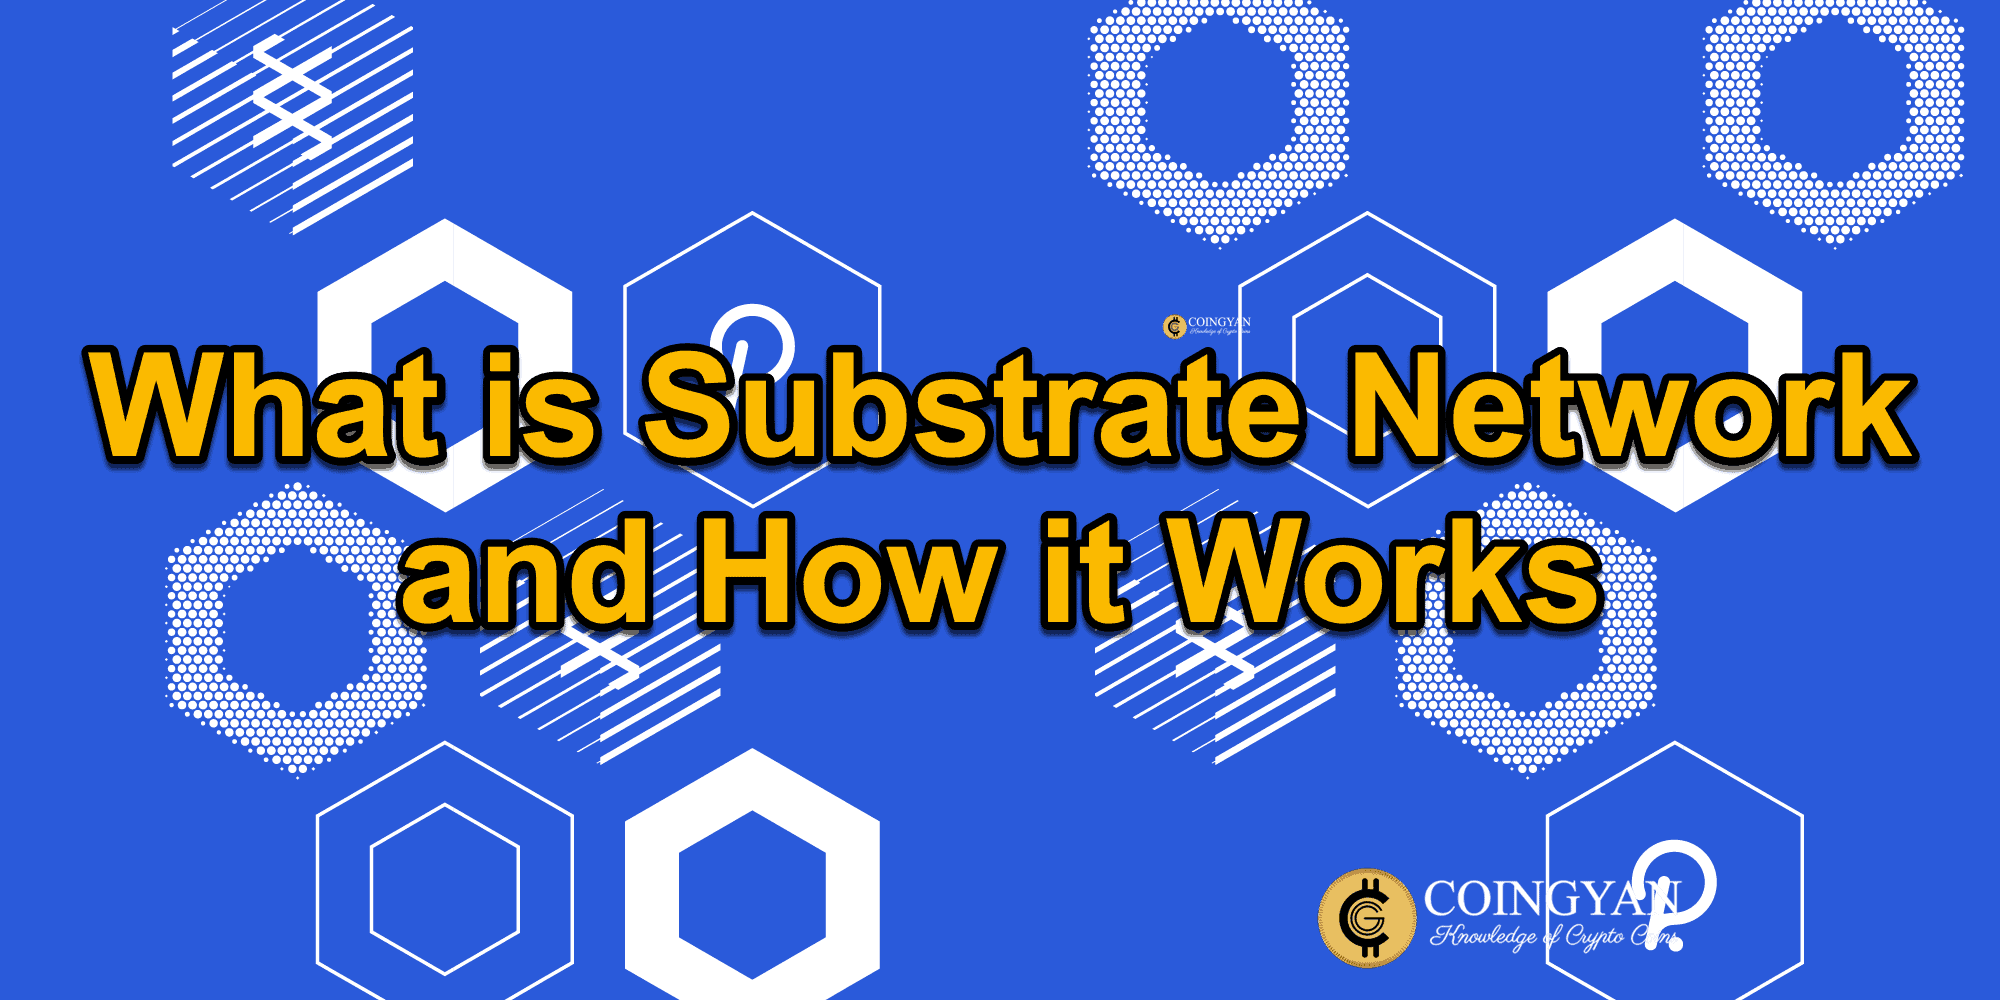 What is Substrate Network and How it Works - CoinGyan